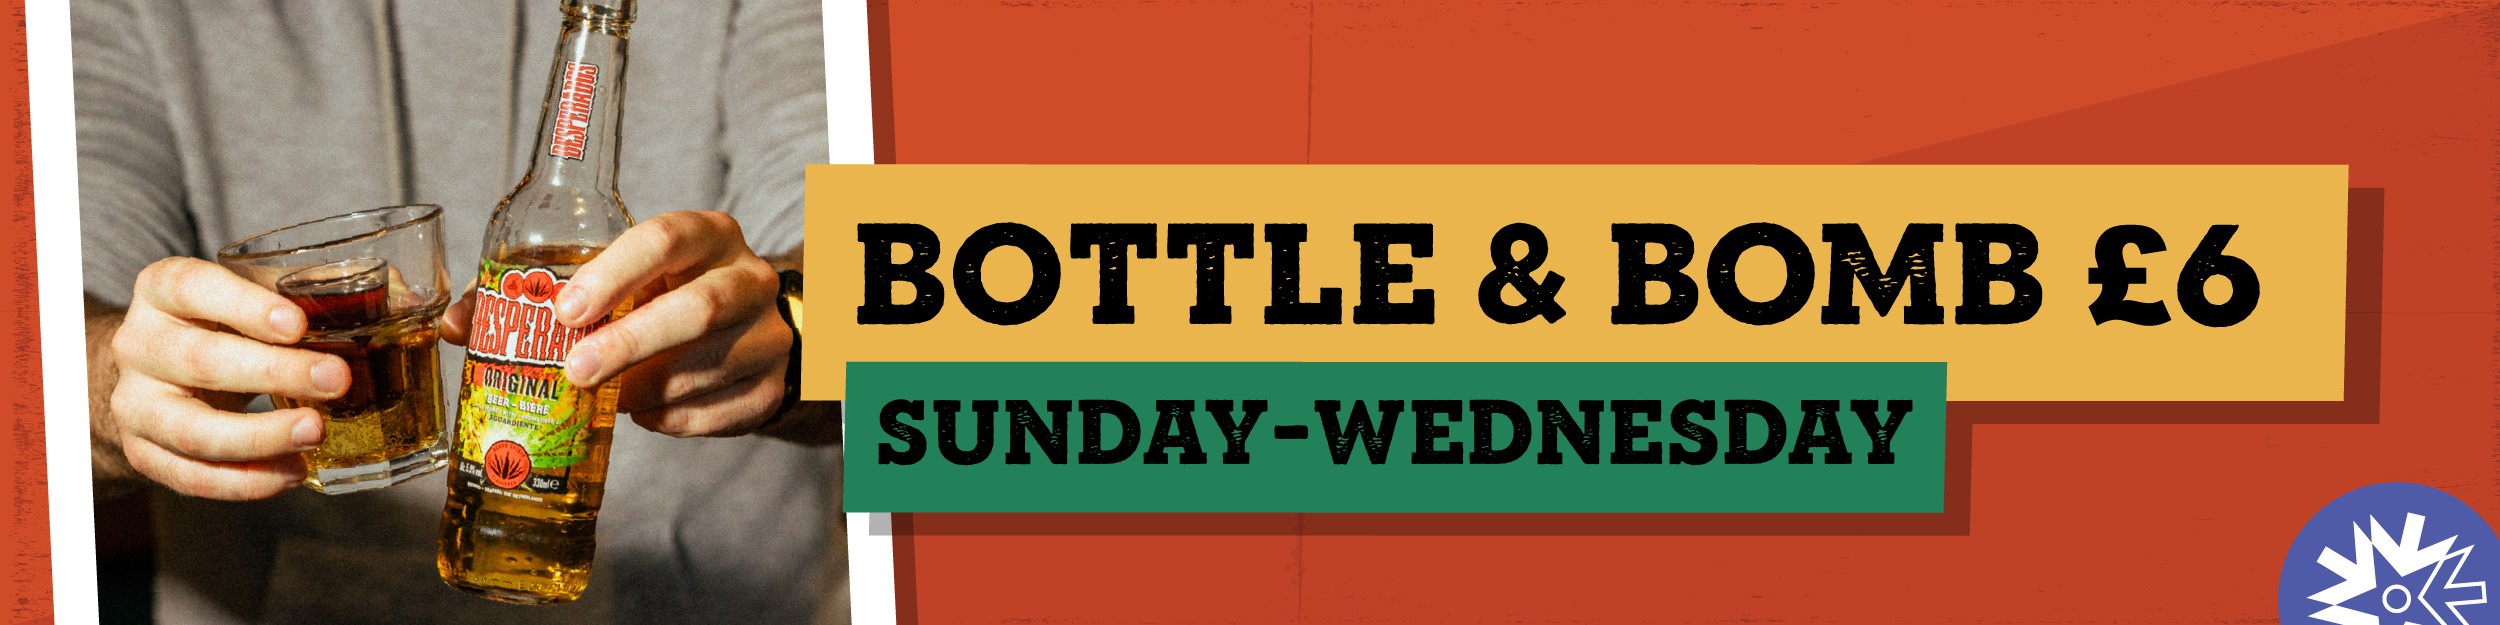 Student Deals: Bottle and Bomb for £6 Sunday to Wednesday